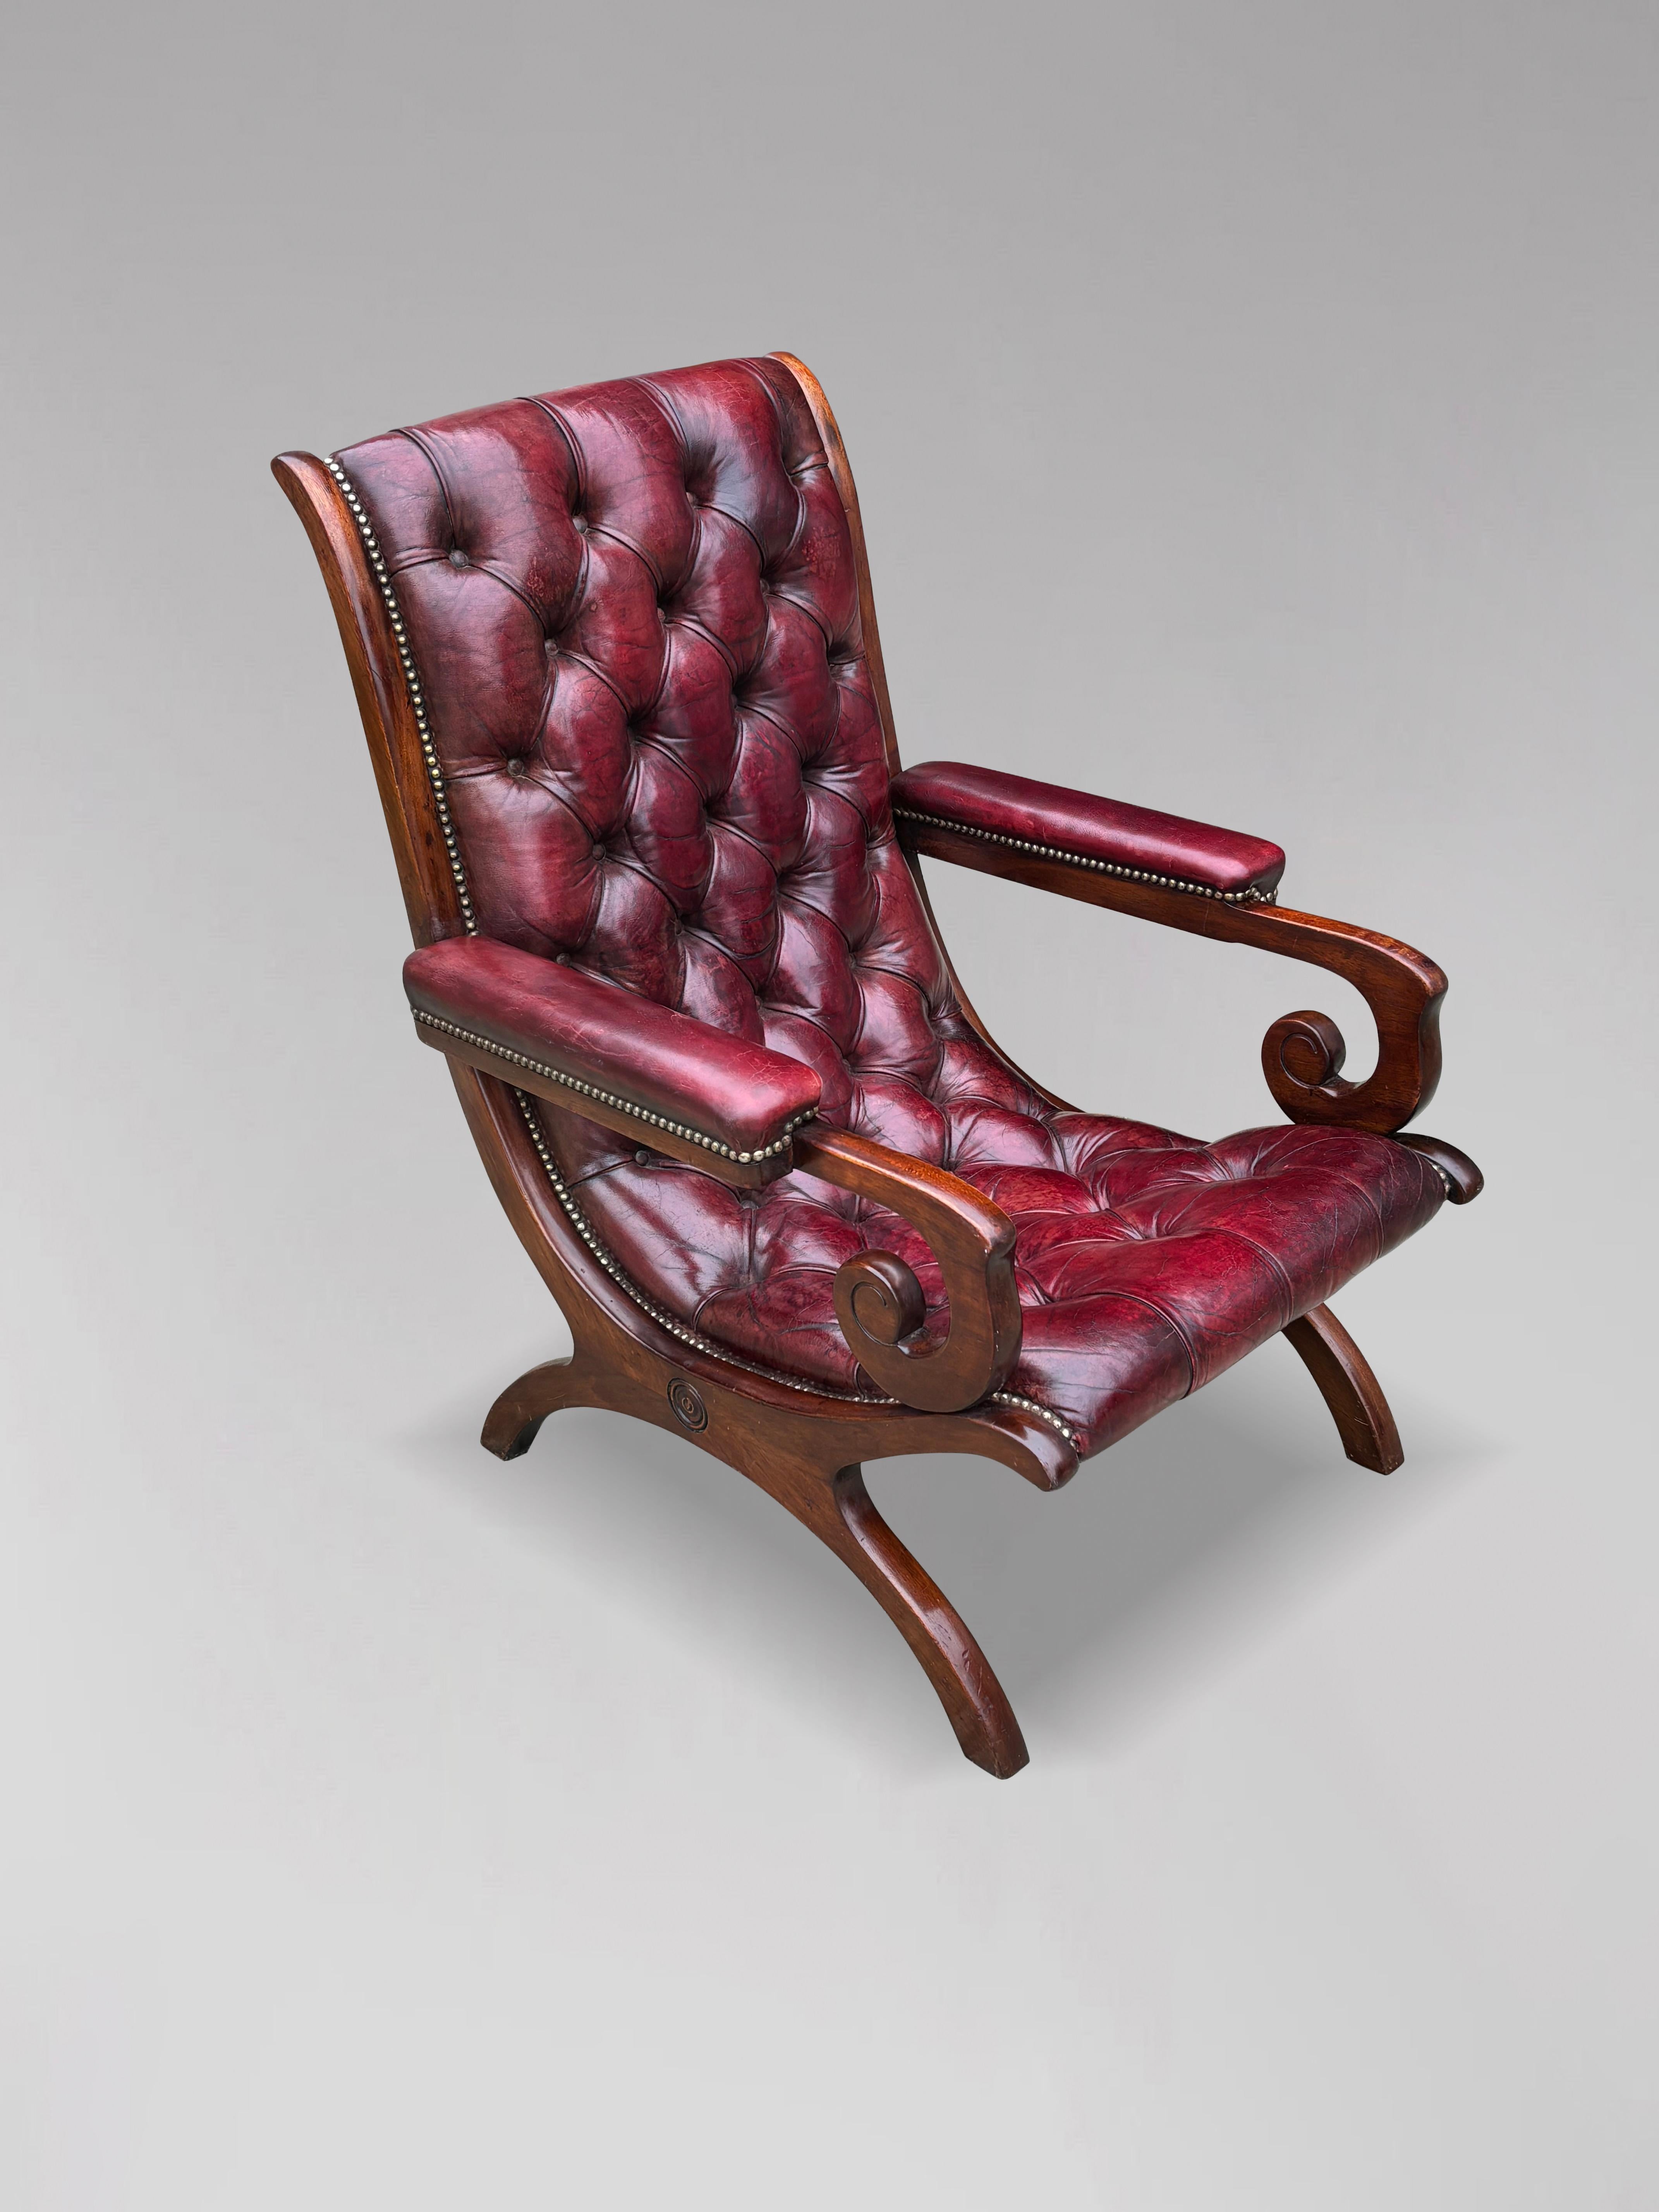 Quality Burgundy Red Leather Chesterfield Slipper Armchair In Good Condition For Sale In Petworth,West Sussex, GB